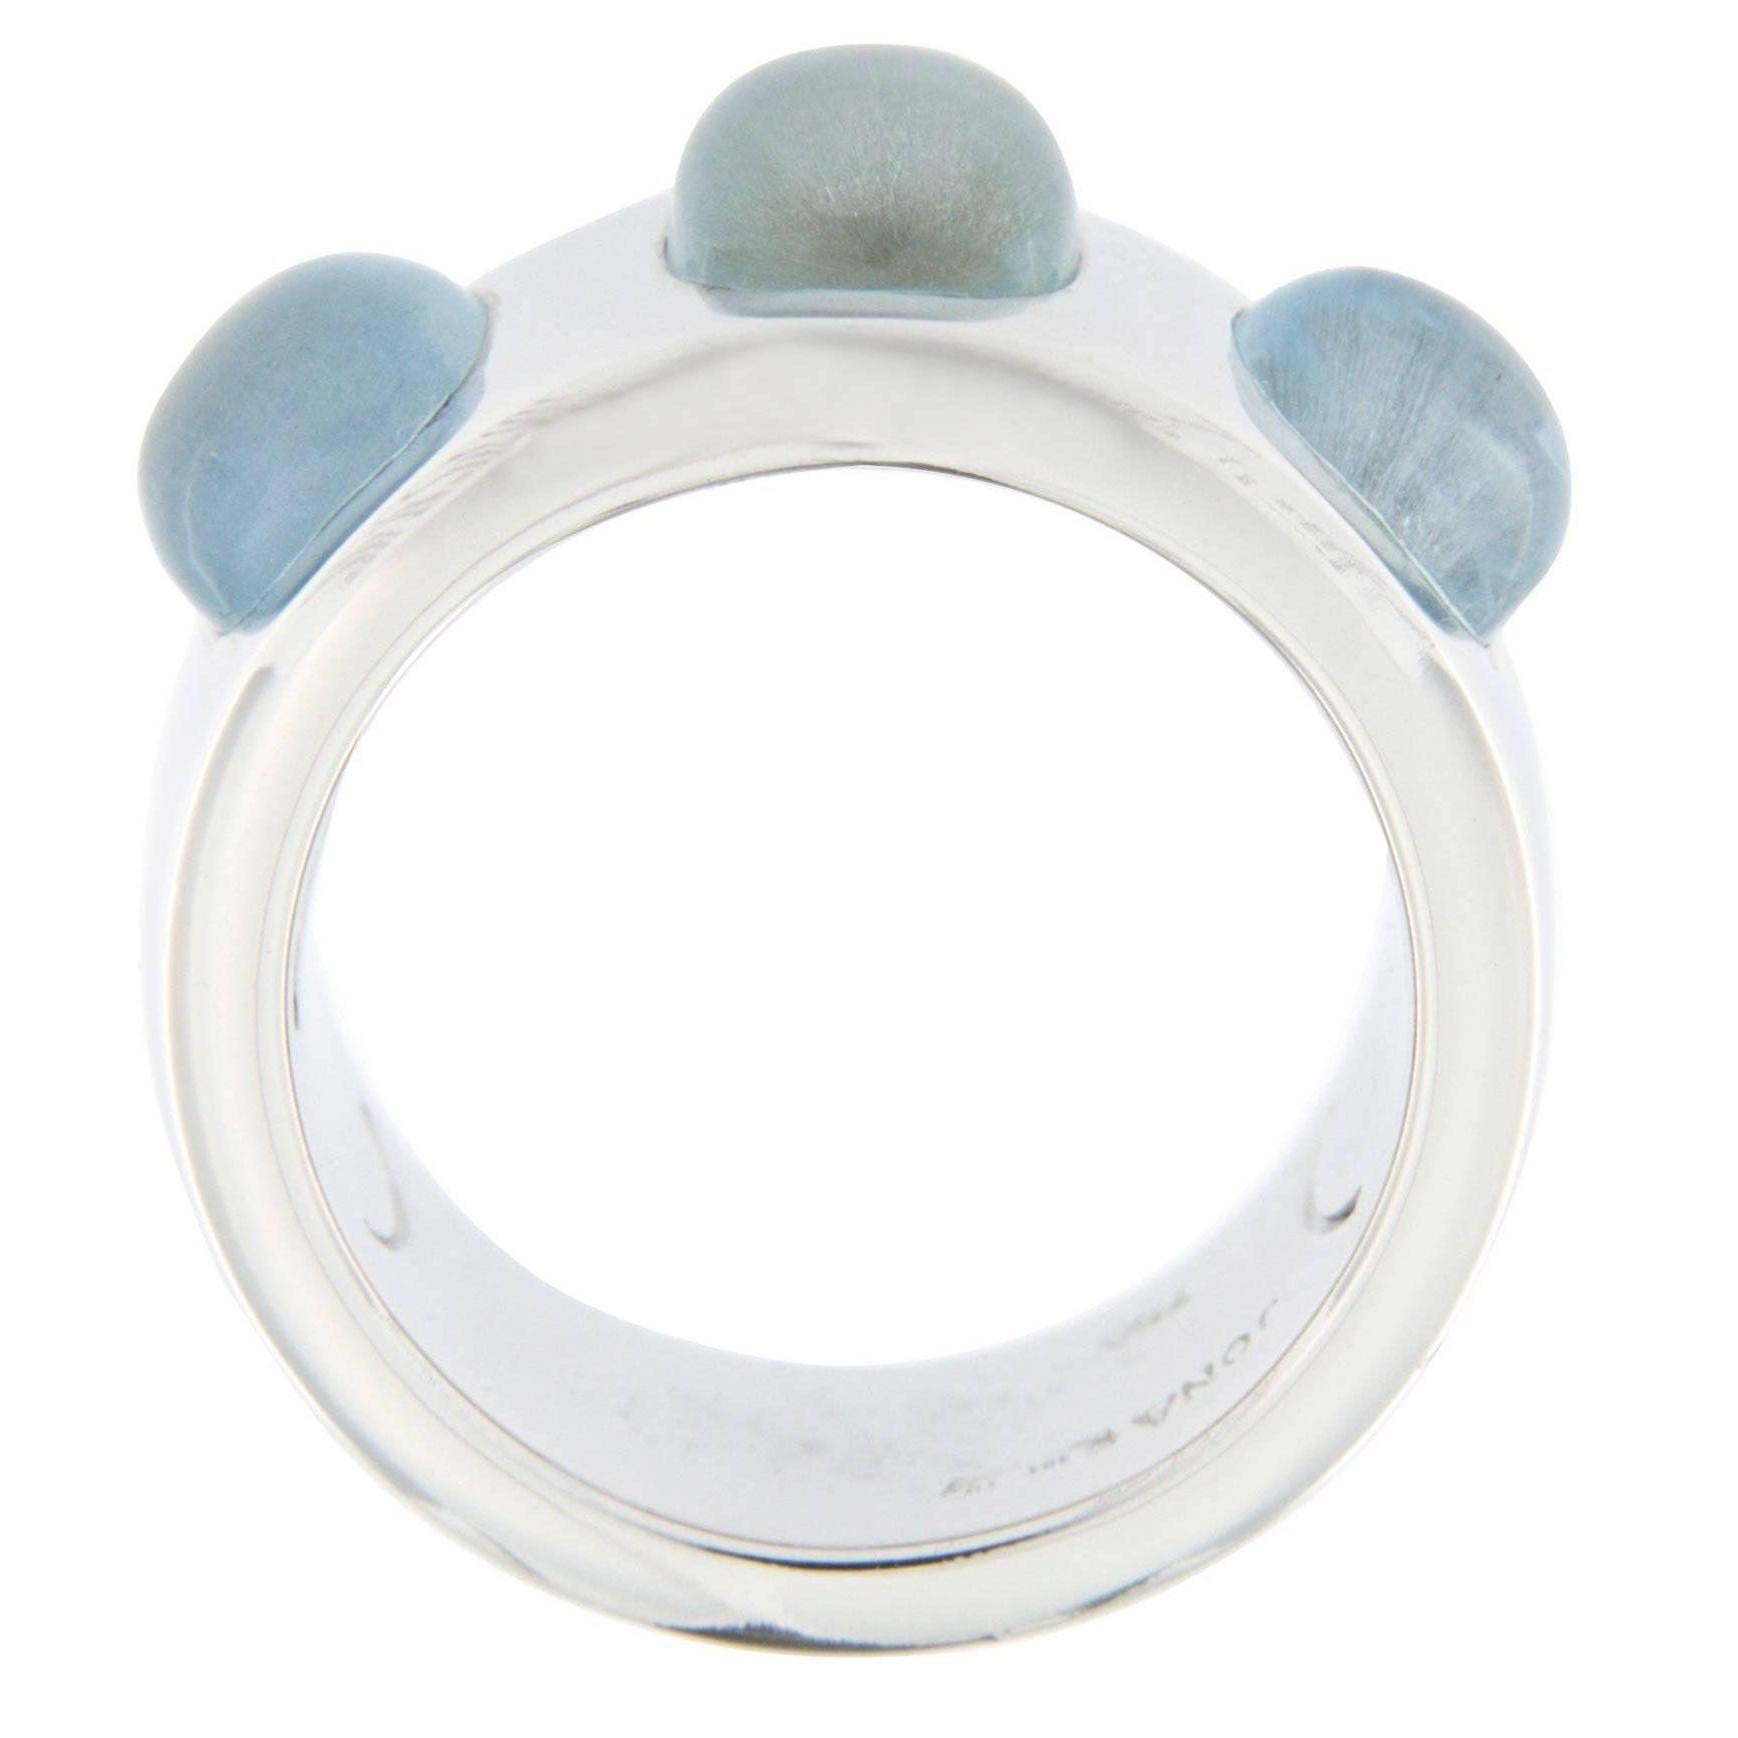 Jona design collection, hand crafted in Italy, 18 karat white gold band ring set with three aquamarine cabochon weighing 4.0 carats in total. US size 6 / EU size 12. Can be sized to any specification.

Dimensions:
H 0.95 in. x W 0.84 in x D 0.36